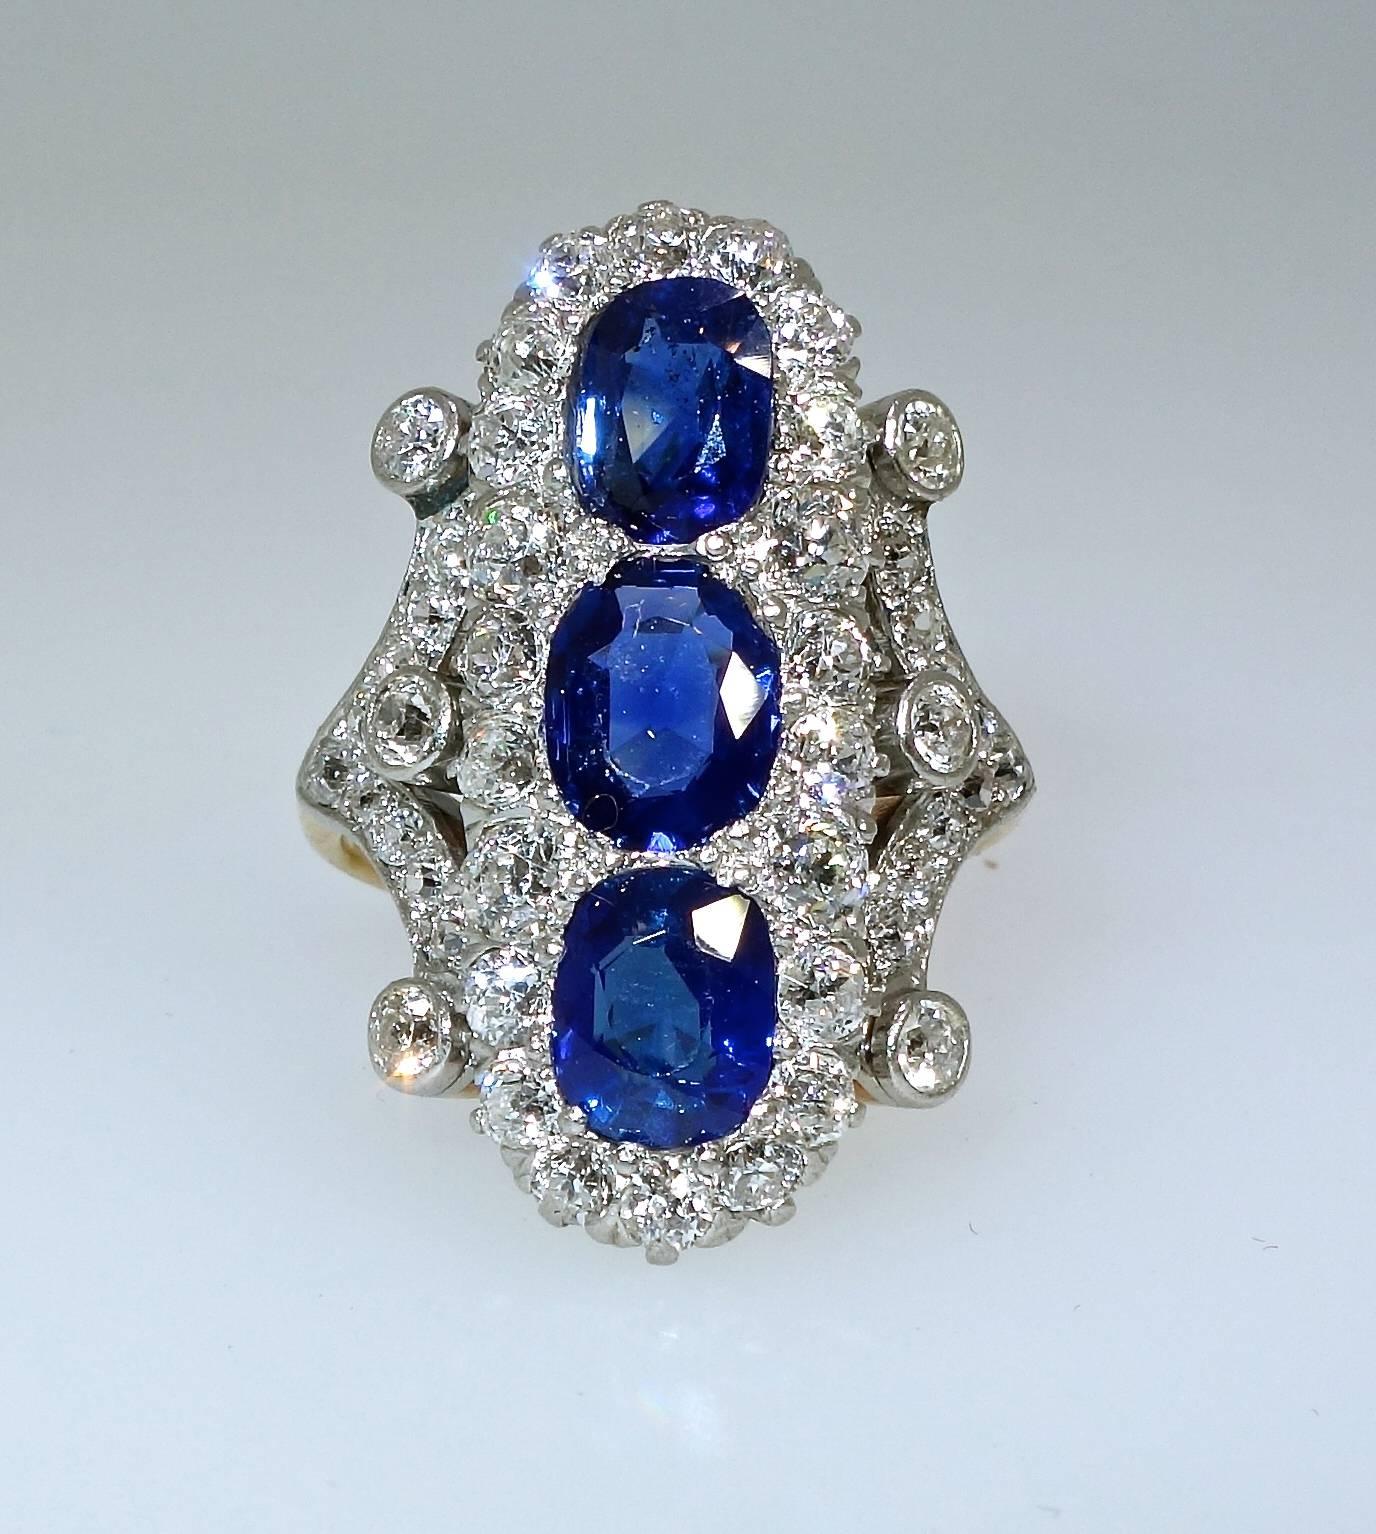 The three, probably from Burma, sapphires are all natural, unheated, and display very fine color.  The are surrounded by European cut diamonds - all well cut, white (H) and very slightly included (VS).  This platinum ring is simply beautiful and a